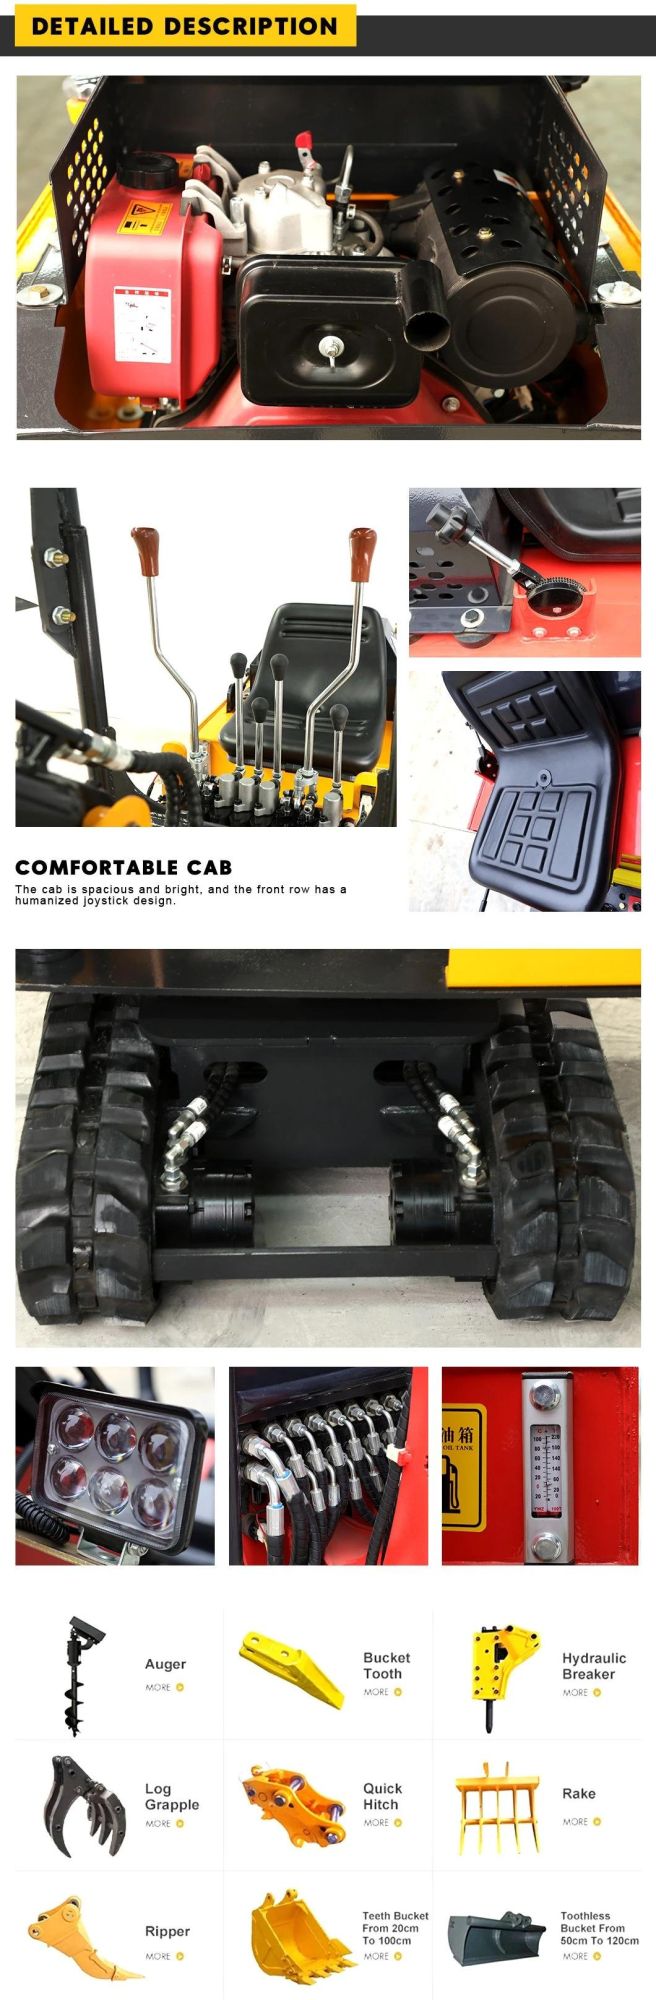 The Price of Manufacturer 800kg Mini Excavator with Yanmar Japan Machinery Video Technical Support Online Support